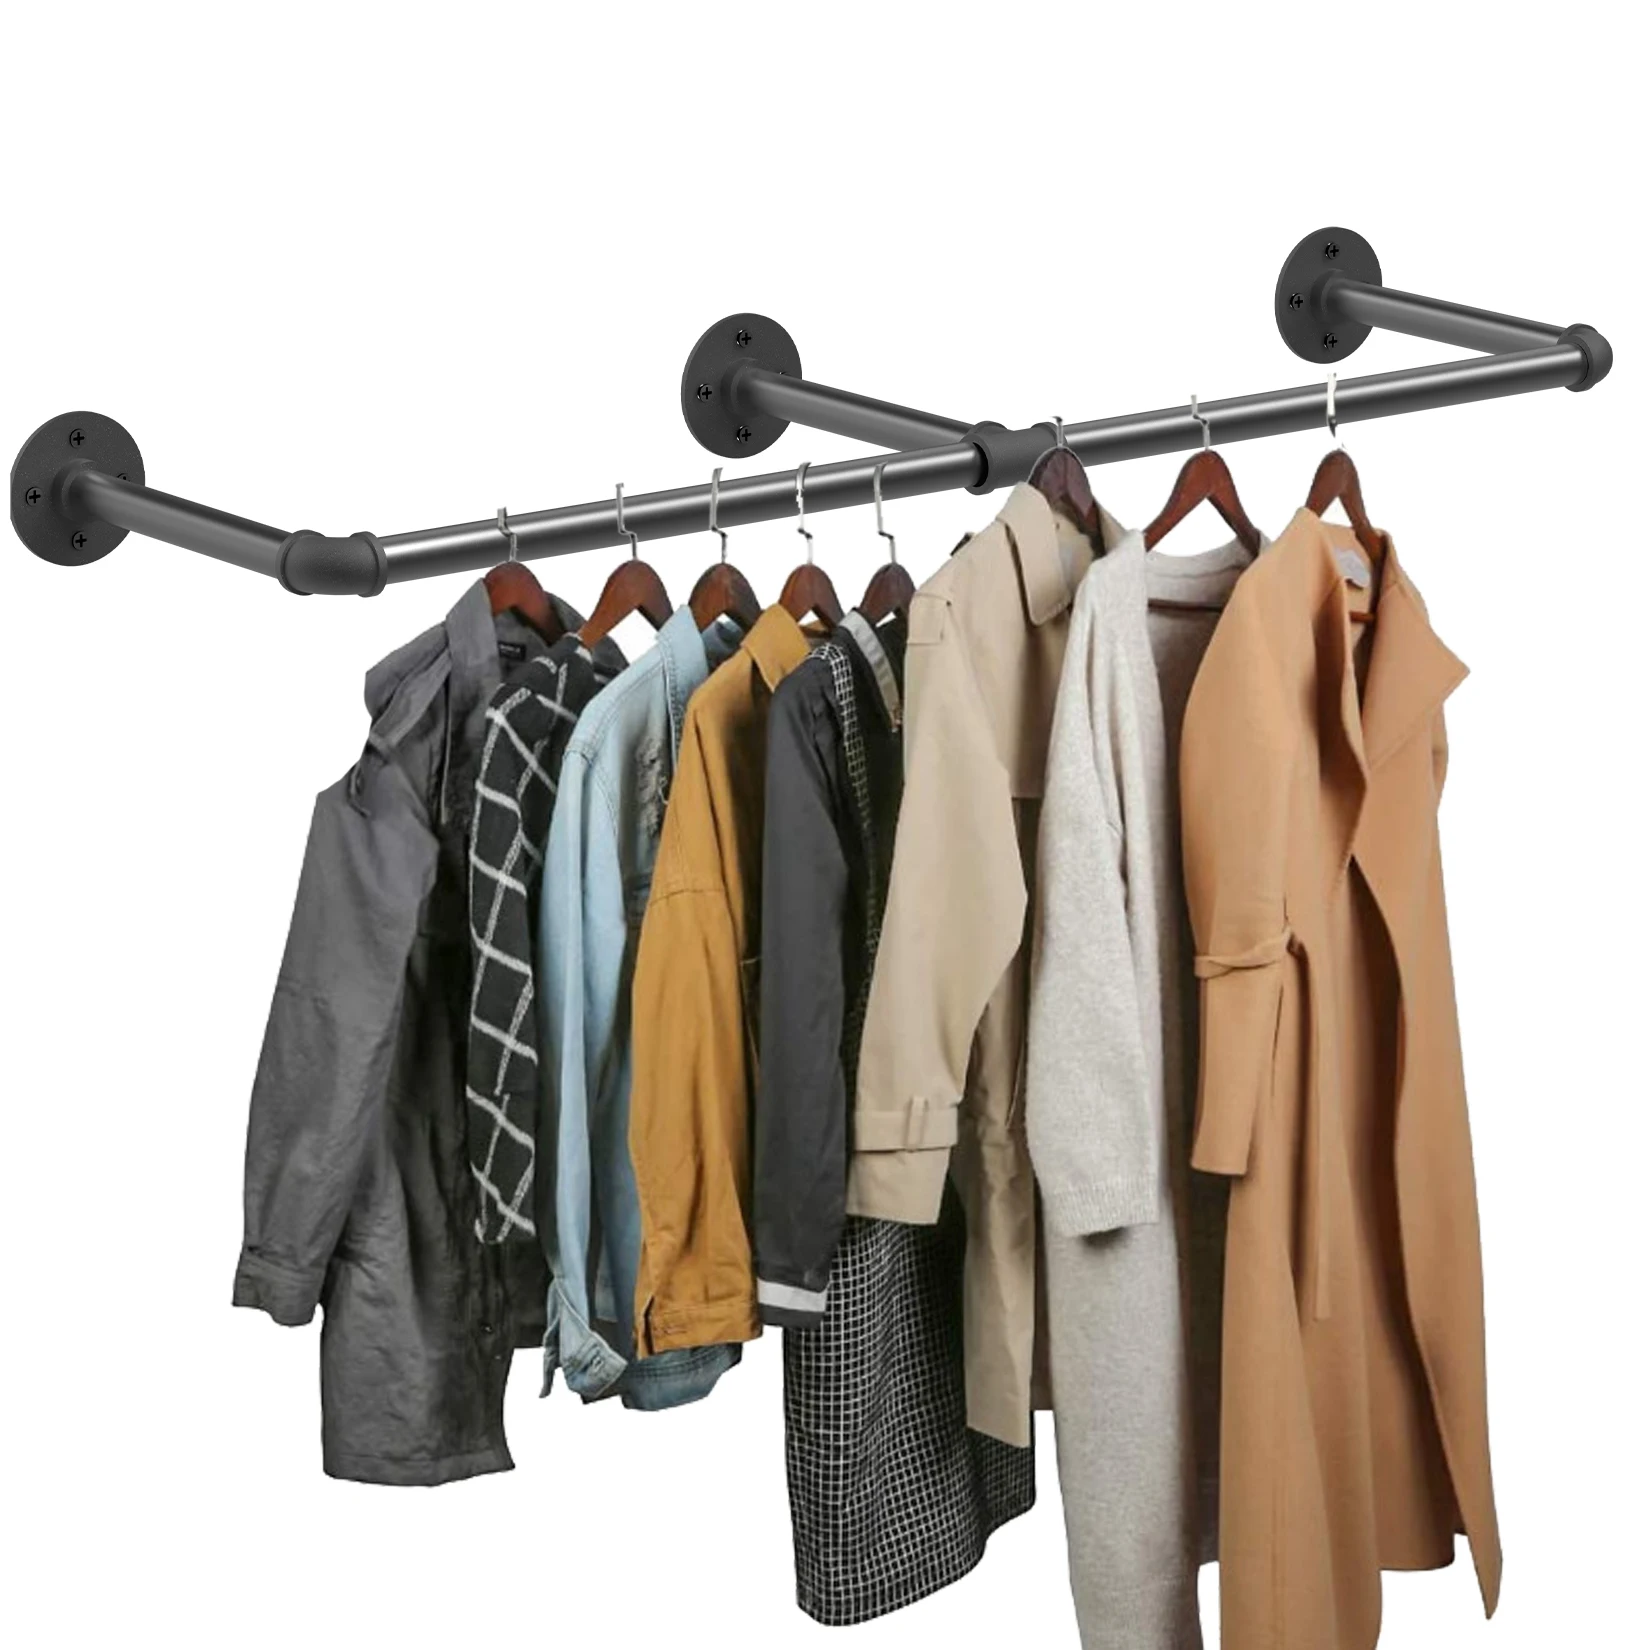 

180cm Bedroom Garment Home Rail Multipurpose Wall Mounted Industrial Pipe Clothes Rack Space Saving Hanging Shelf with 3 Hooks